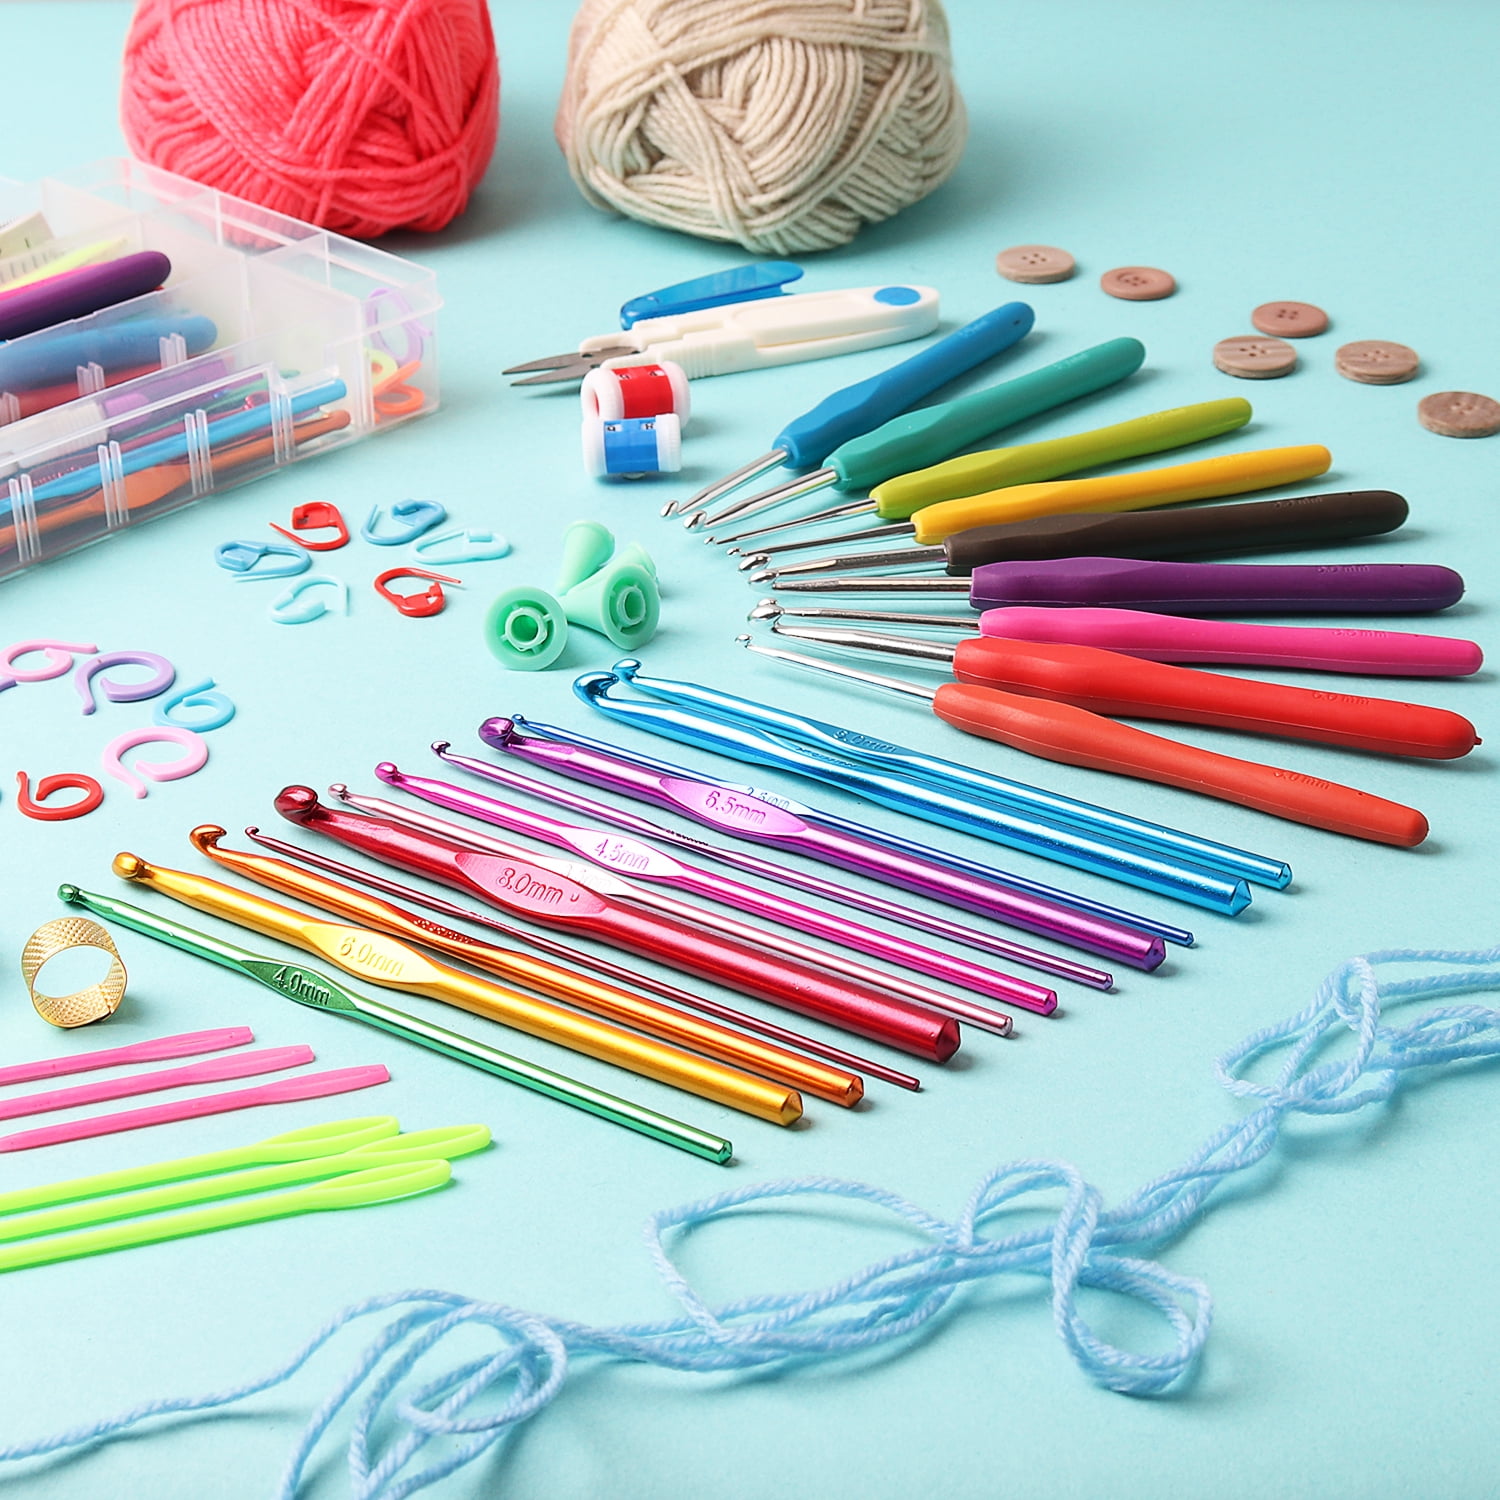 Hearth & Harbor Crochet Counter, Crochet Hook Set with Crochet Needles and  Accessories, 23pc 